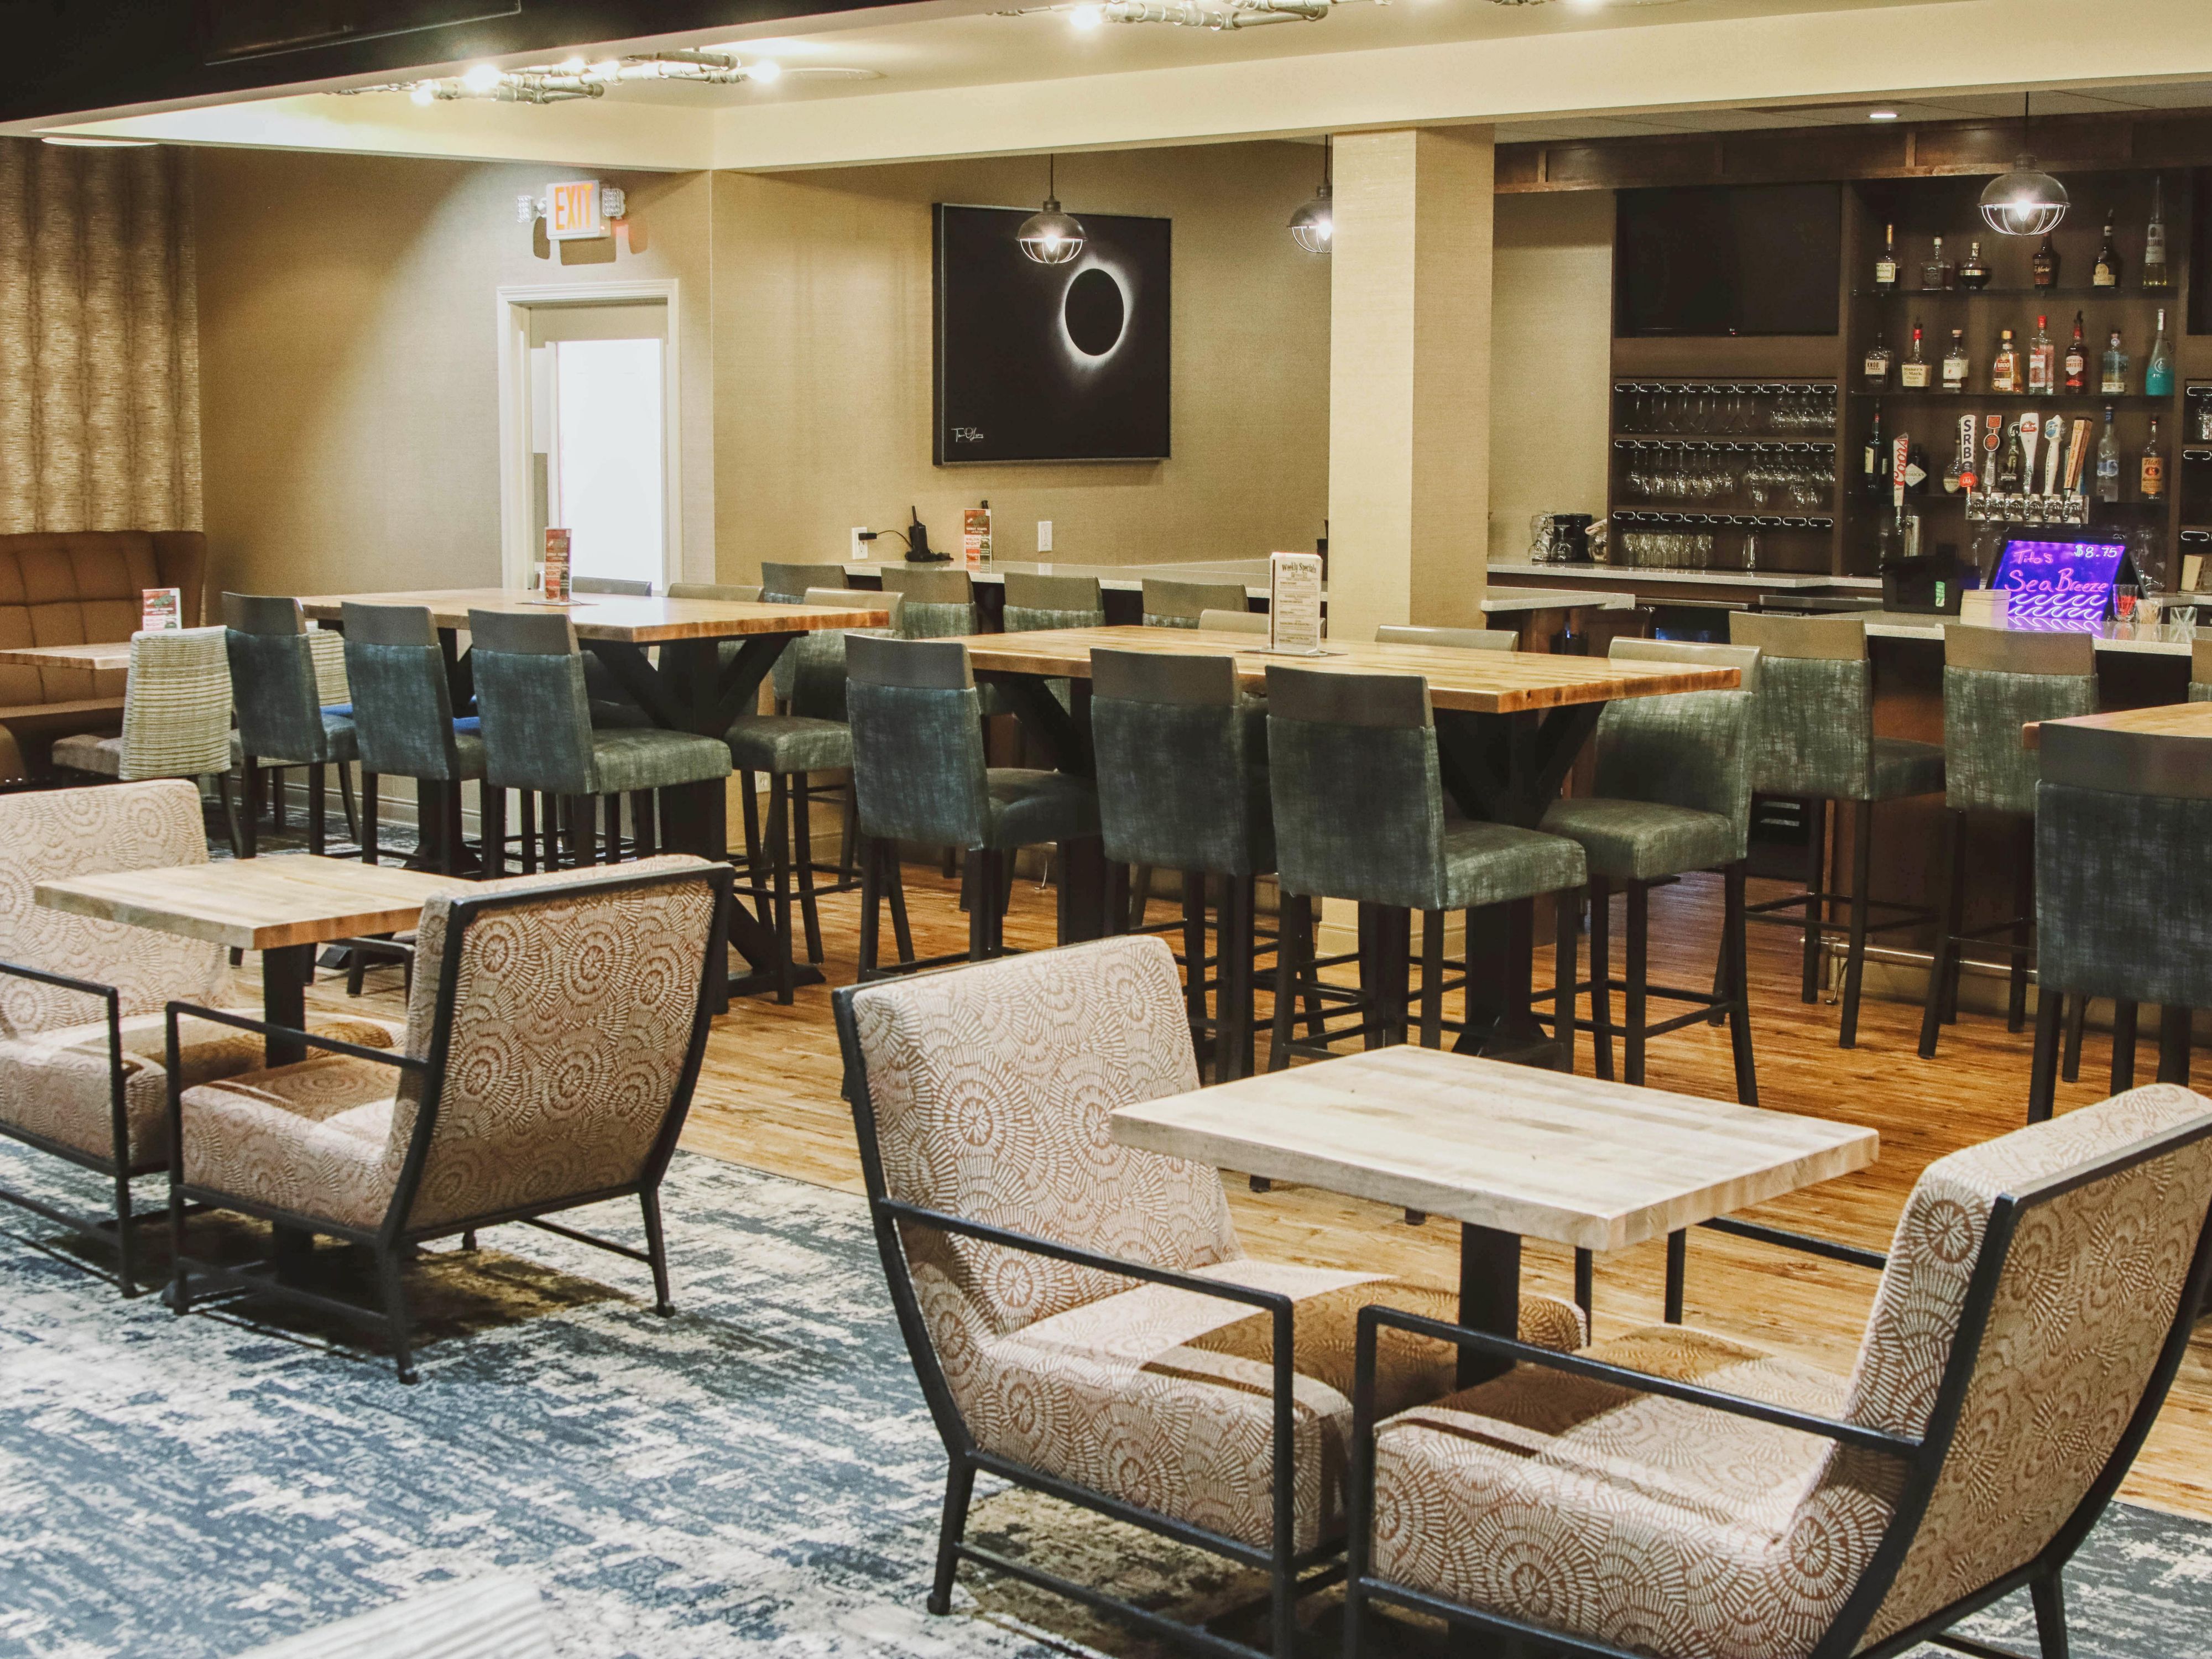 Come over to our on-site lounge and enjoy a drink and appetizer or even grab some dinner from 5pm until 10pm. Four flat screen TV's in our comfortable lounge for you to watch sports or just keep up on the news. 